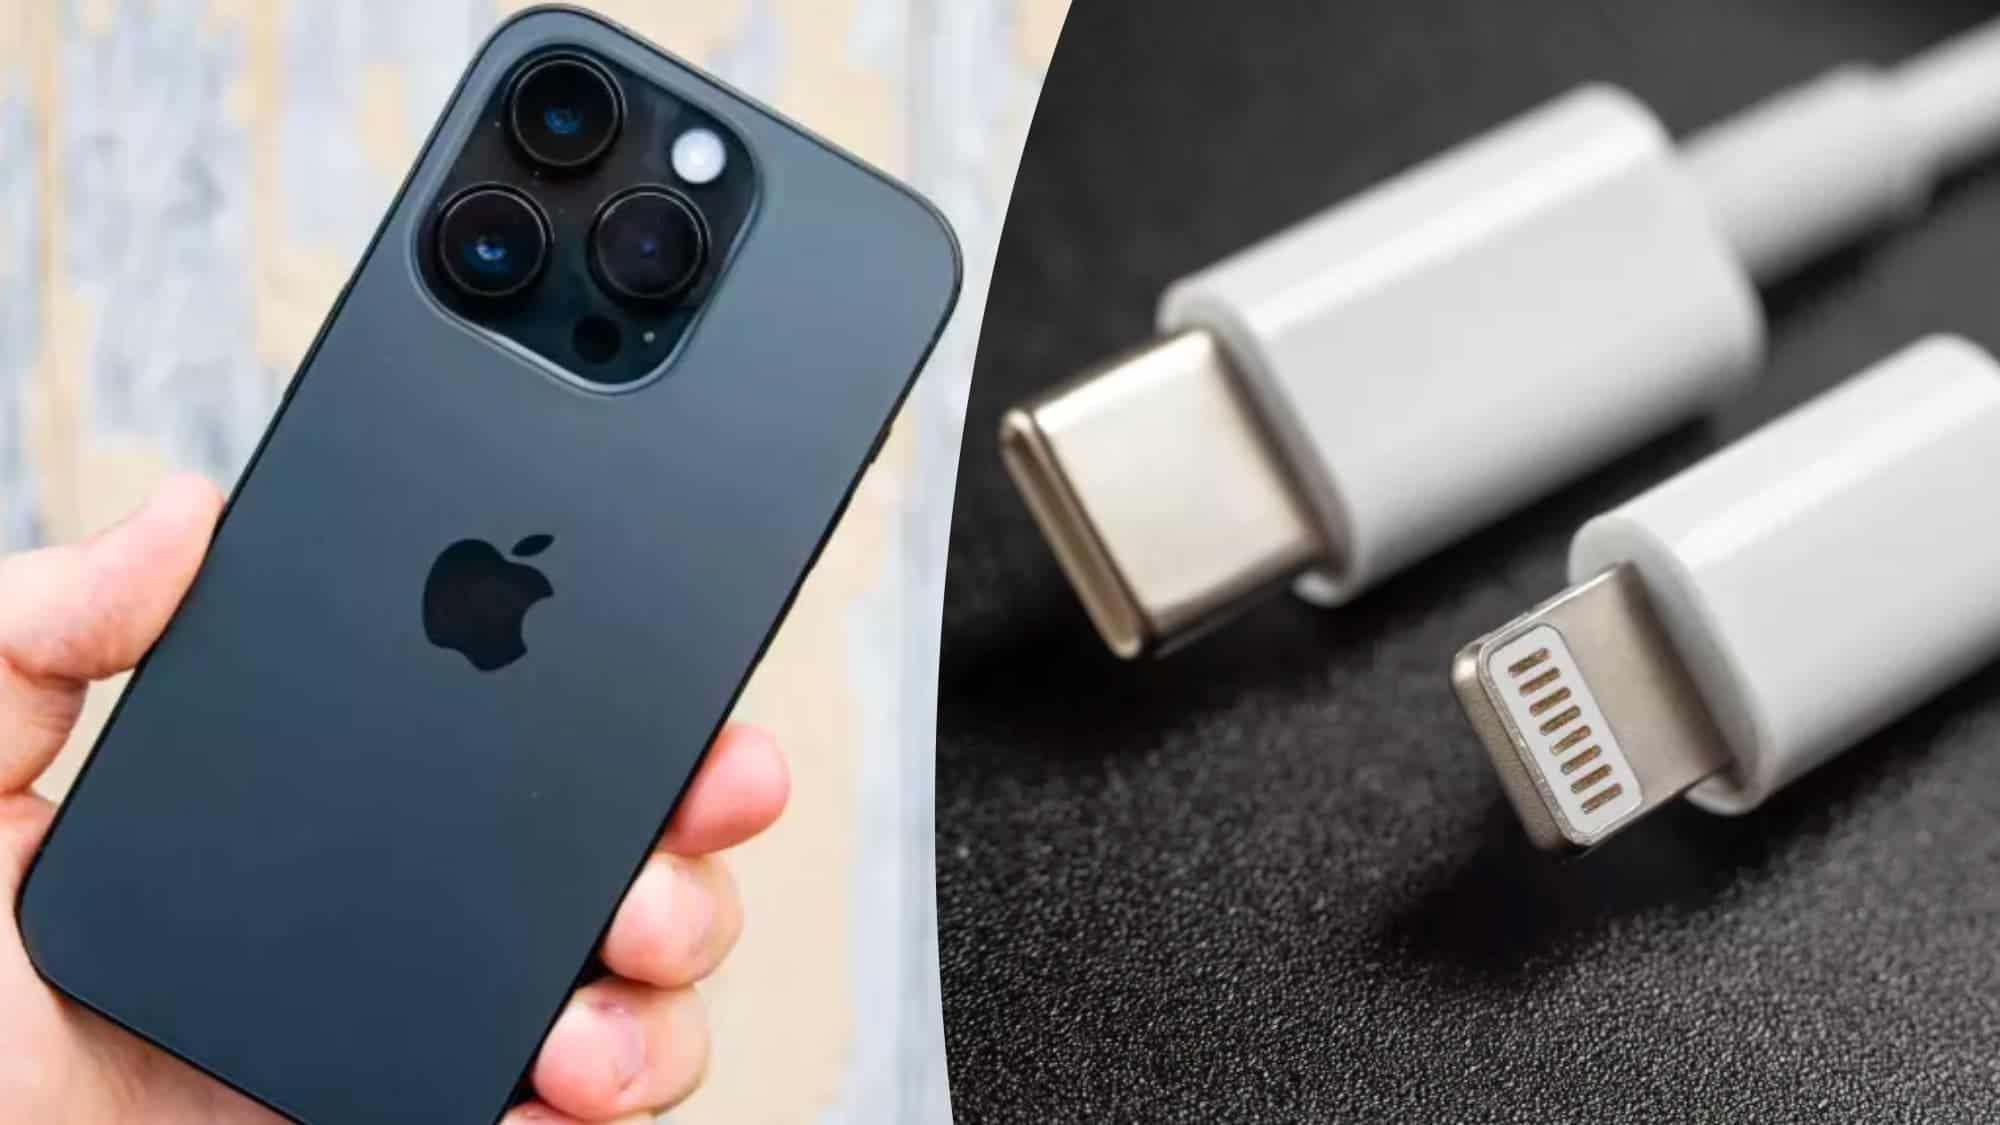 Apple's Switch to USB-C: iPhone Users Will Learn Not All Cords Are Equal